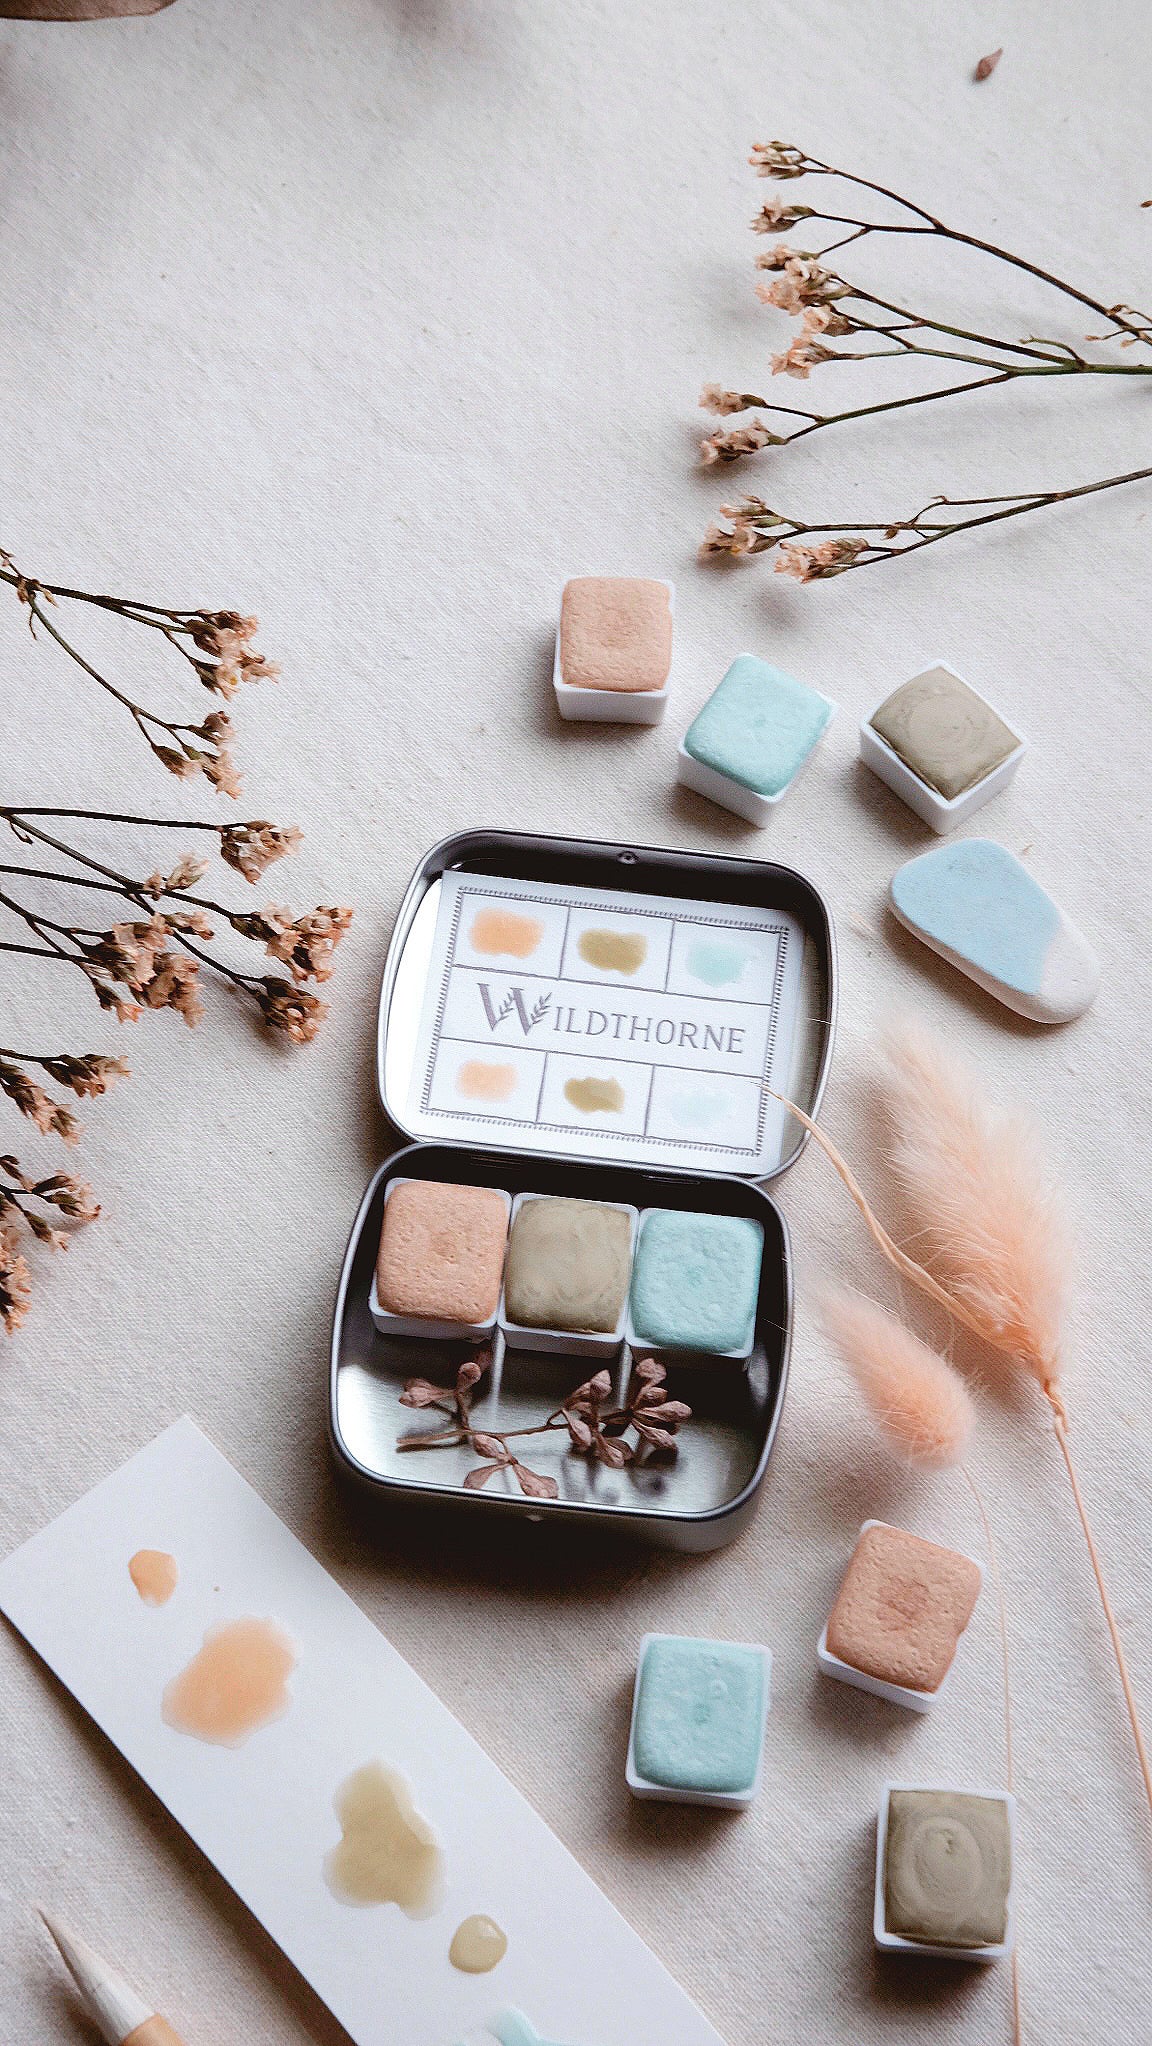 Winter Pastel ii. - Limited edition Gemstone Mineral watercolor palette